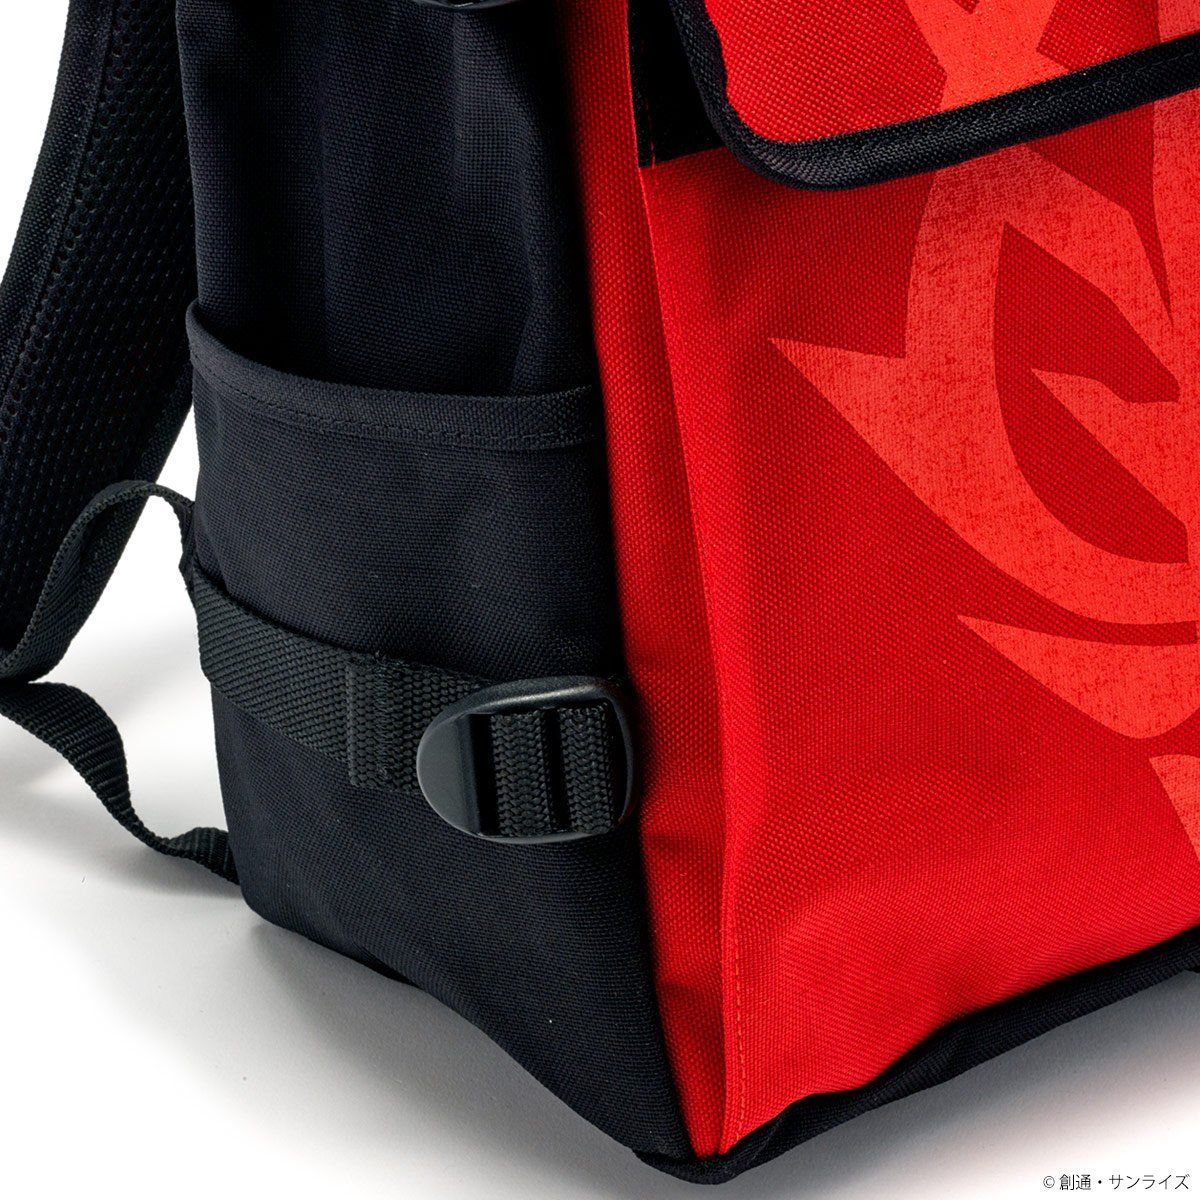 STRICT-G × Manhattan Portage "Mobile Suit Gundam" 40th Anniversary Backpack Zeon Army Model [End of November]